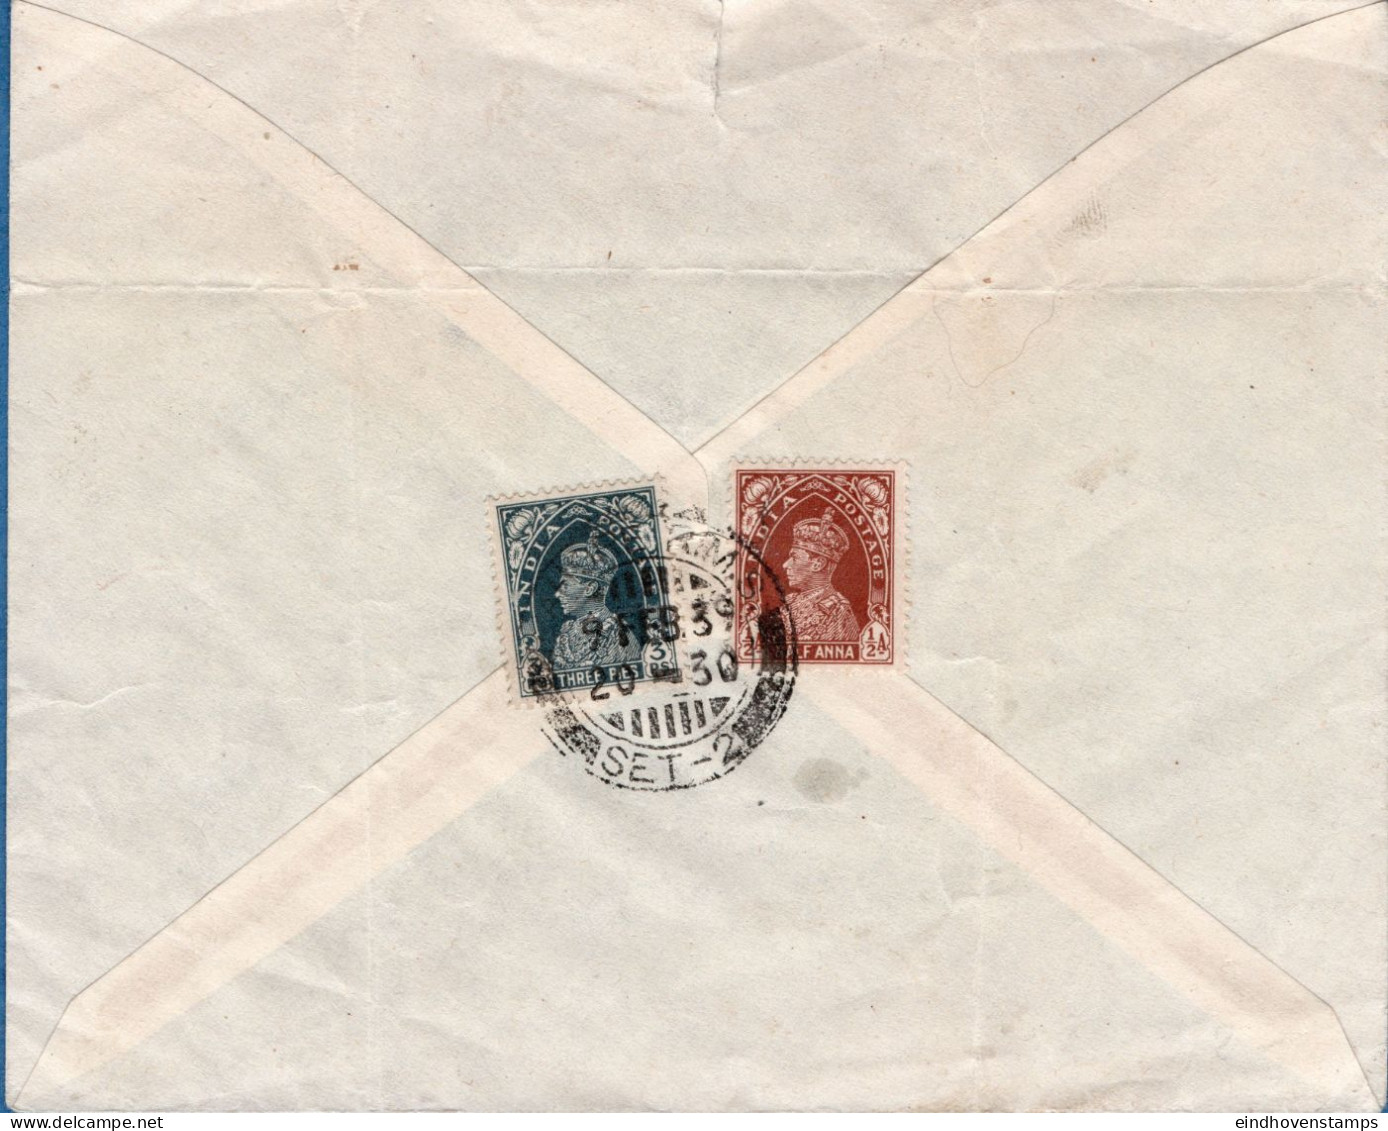 British India - Pakistan Bookpost To Switserland Franked 3p+½d Cancel Lahore R.M.S. 9 Feb 39, Folded With Tear 2311.1008 - 1936-47 Roi Georges VI